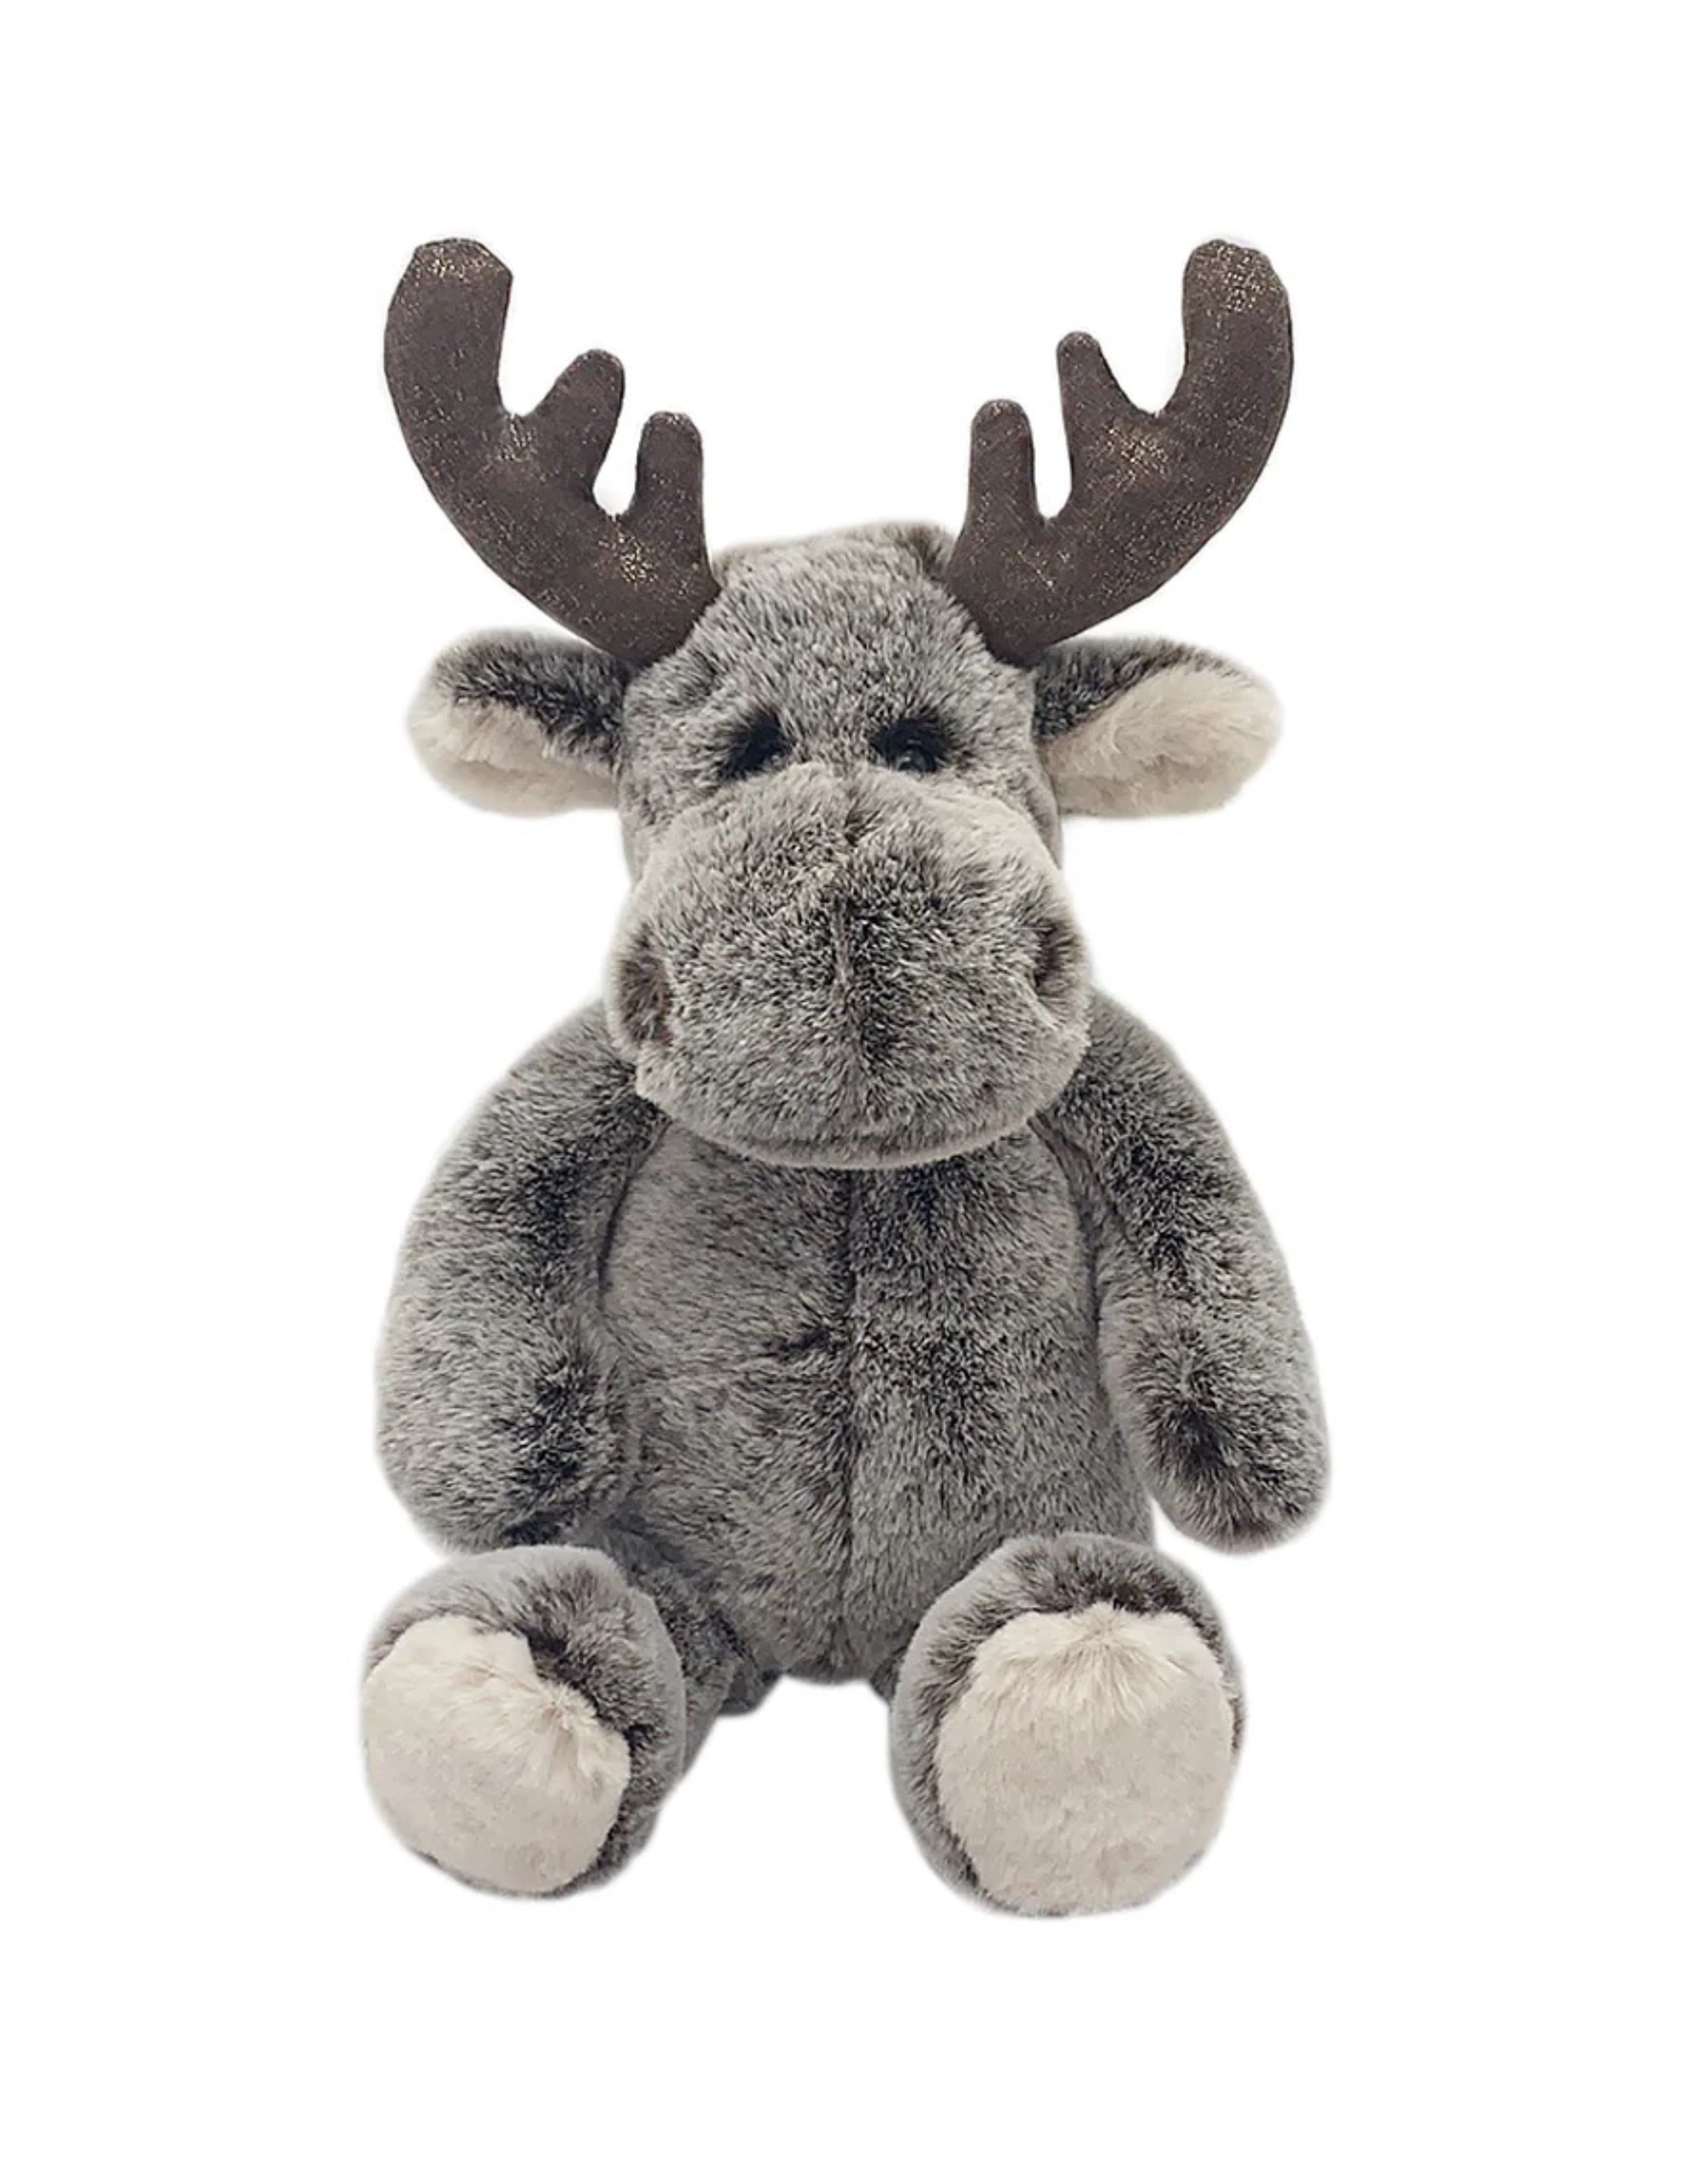 'Marley' the Moose Plush Toy